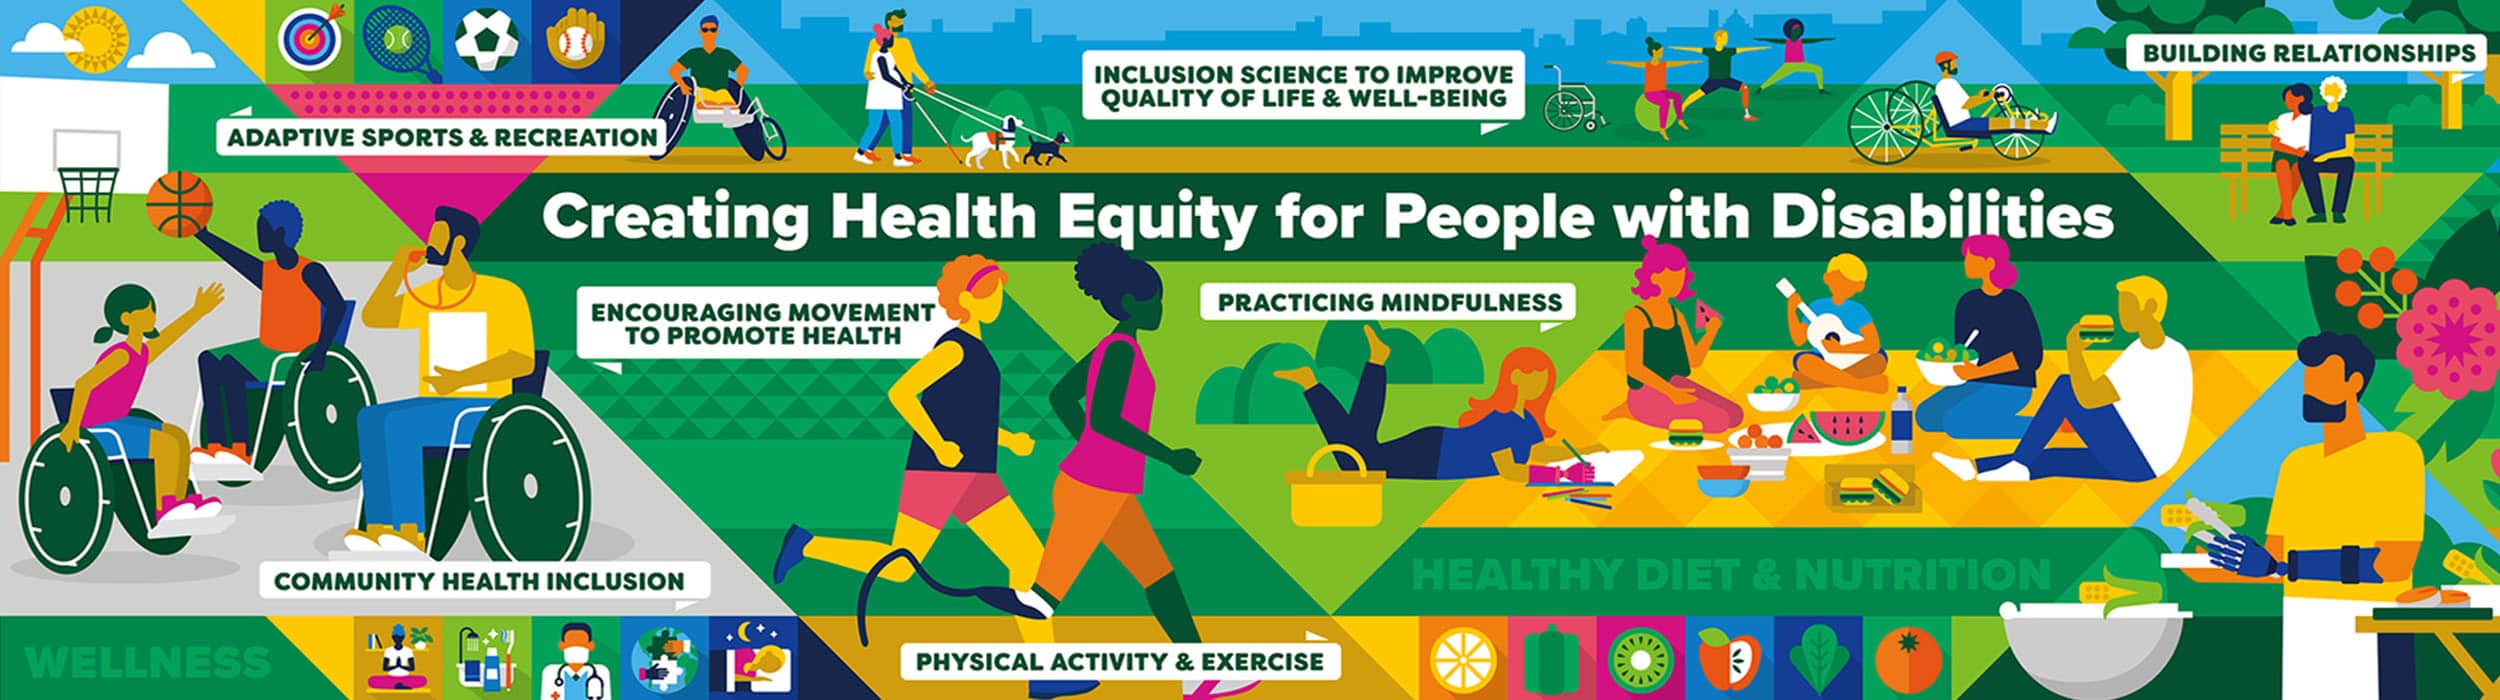 Creating health equity for people with disabilities. Colorful illustrated banner shows people with variety of disabilities playing basketball, having picnics, doing yoga, walking dogs, etc.